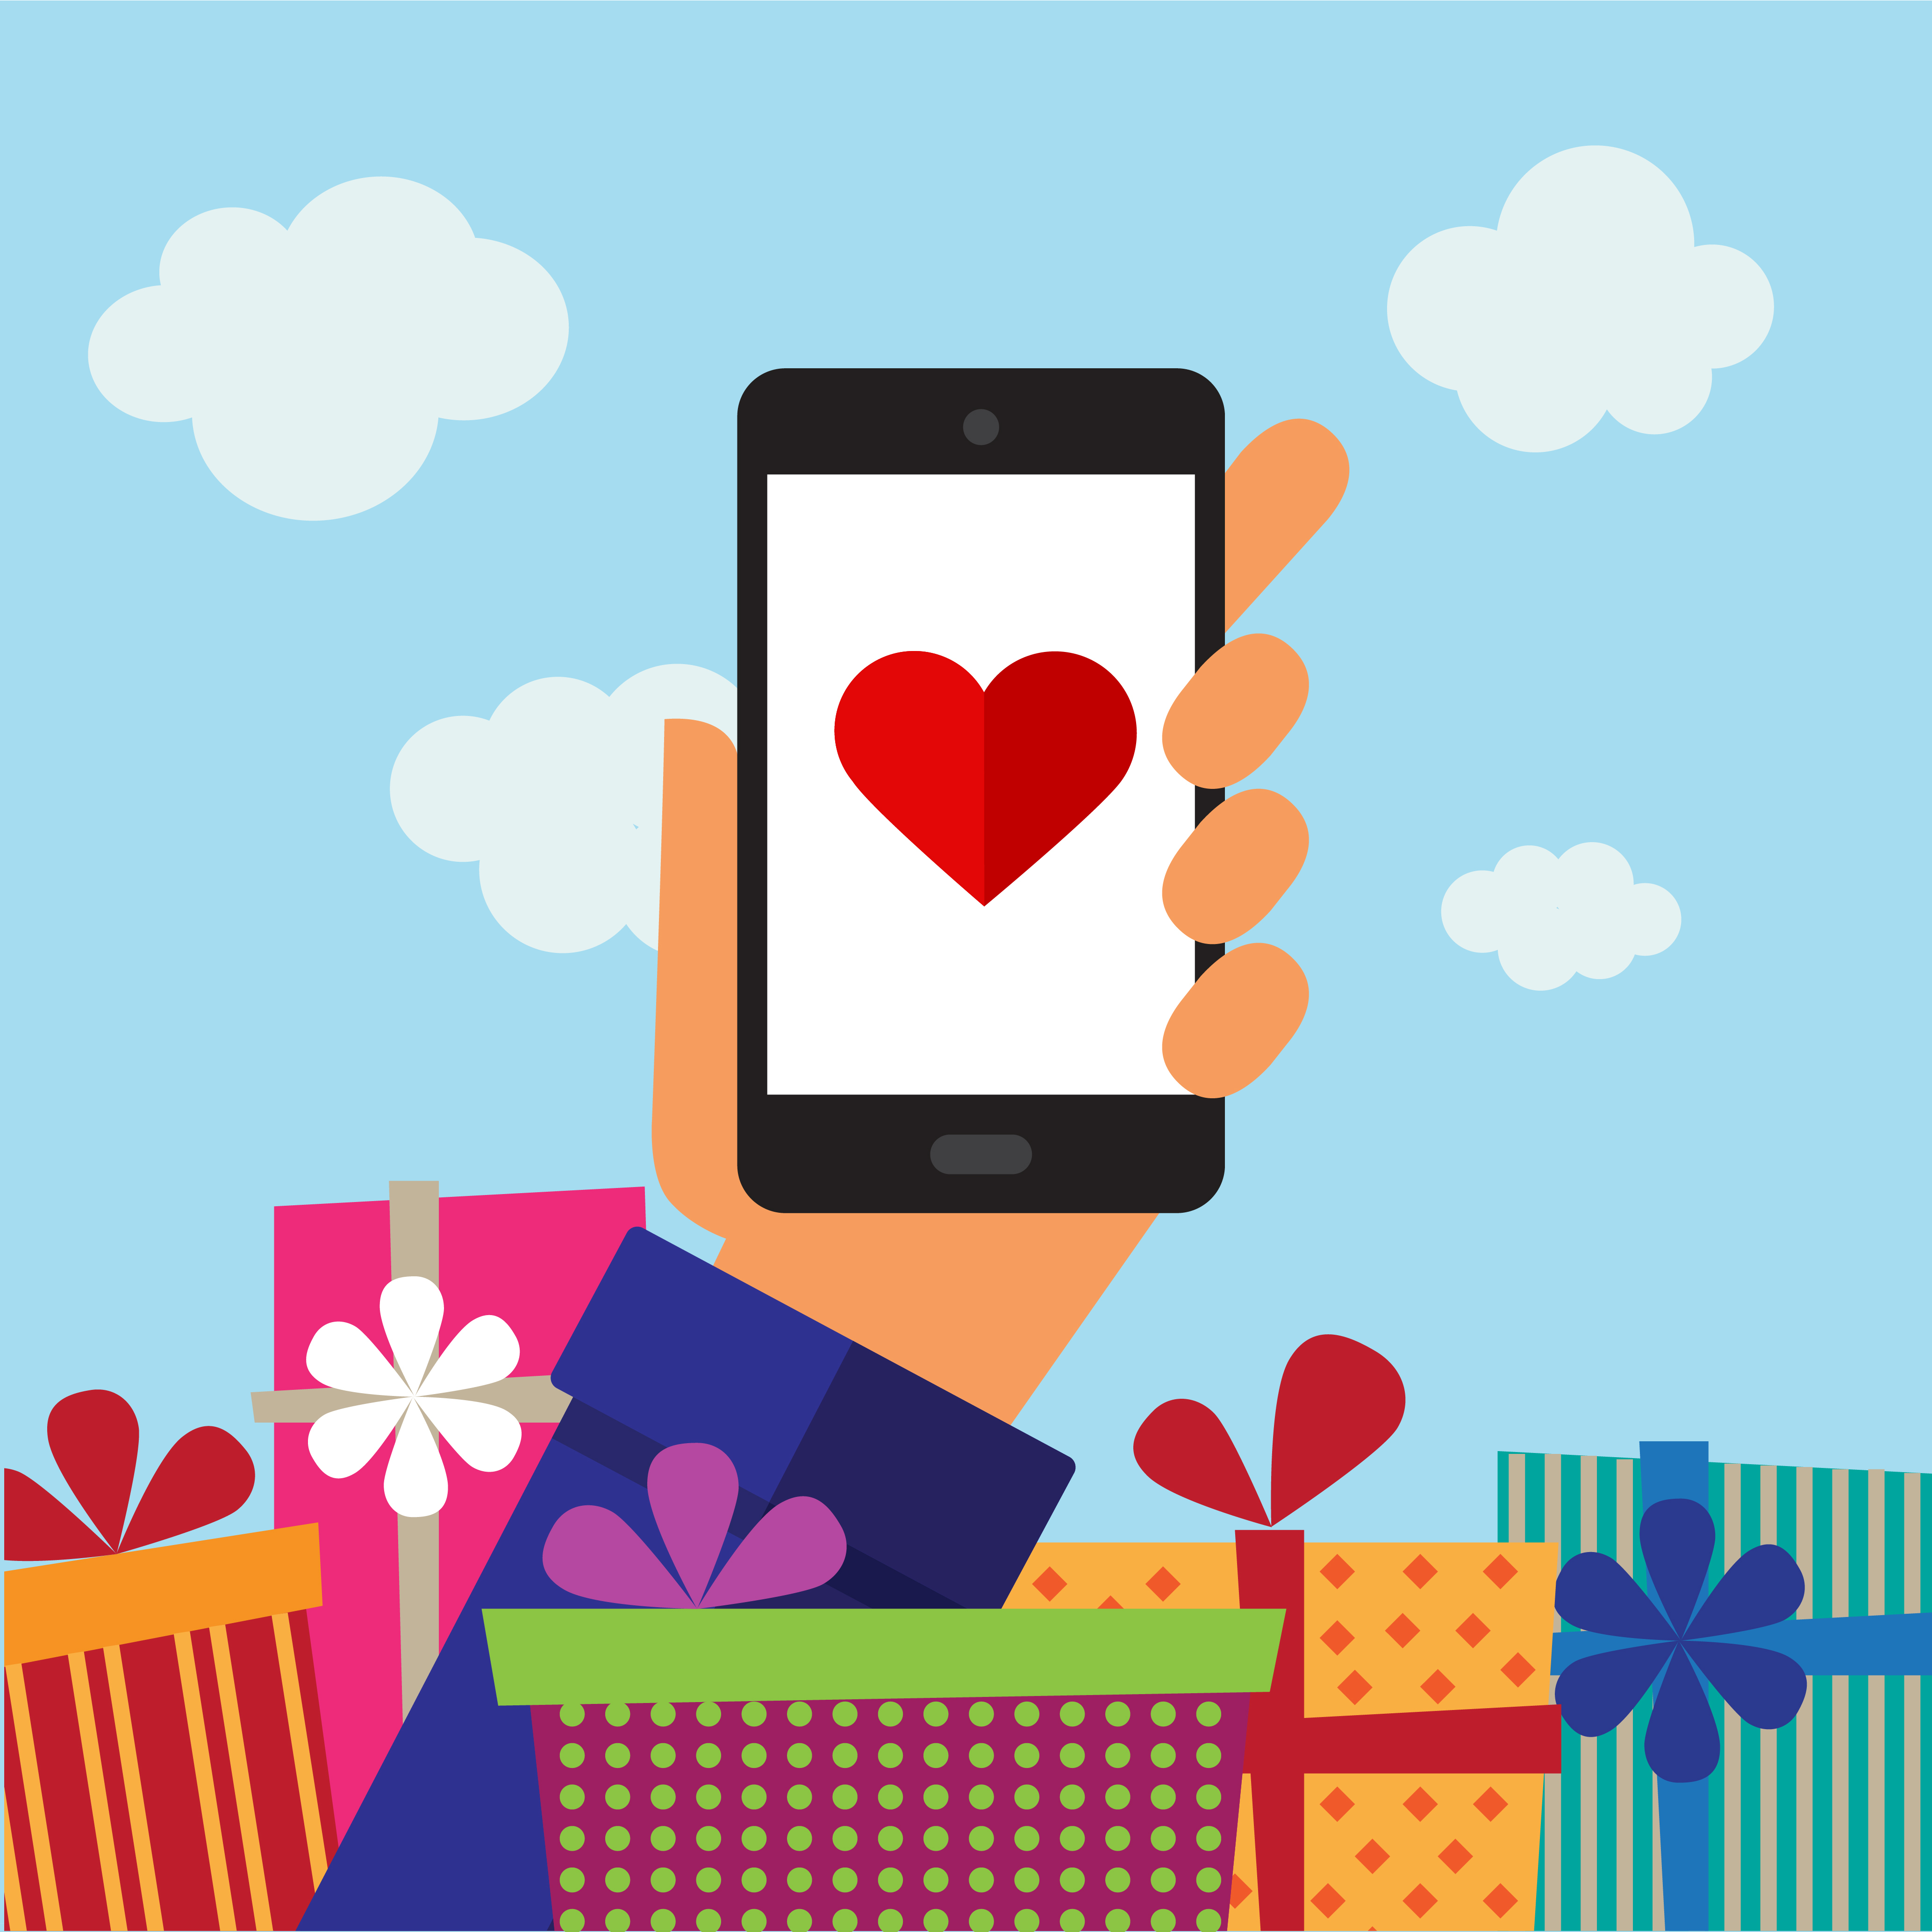 70 Per Cent of Valentine's Day Retail Searches Made on Mobile